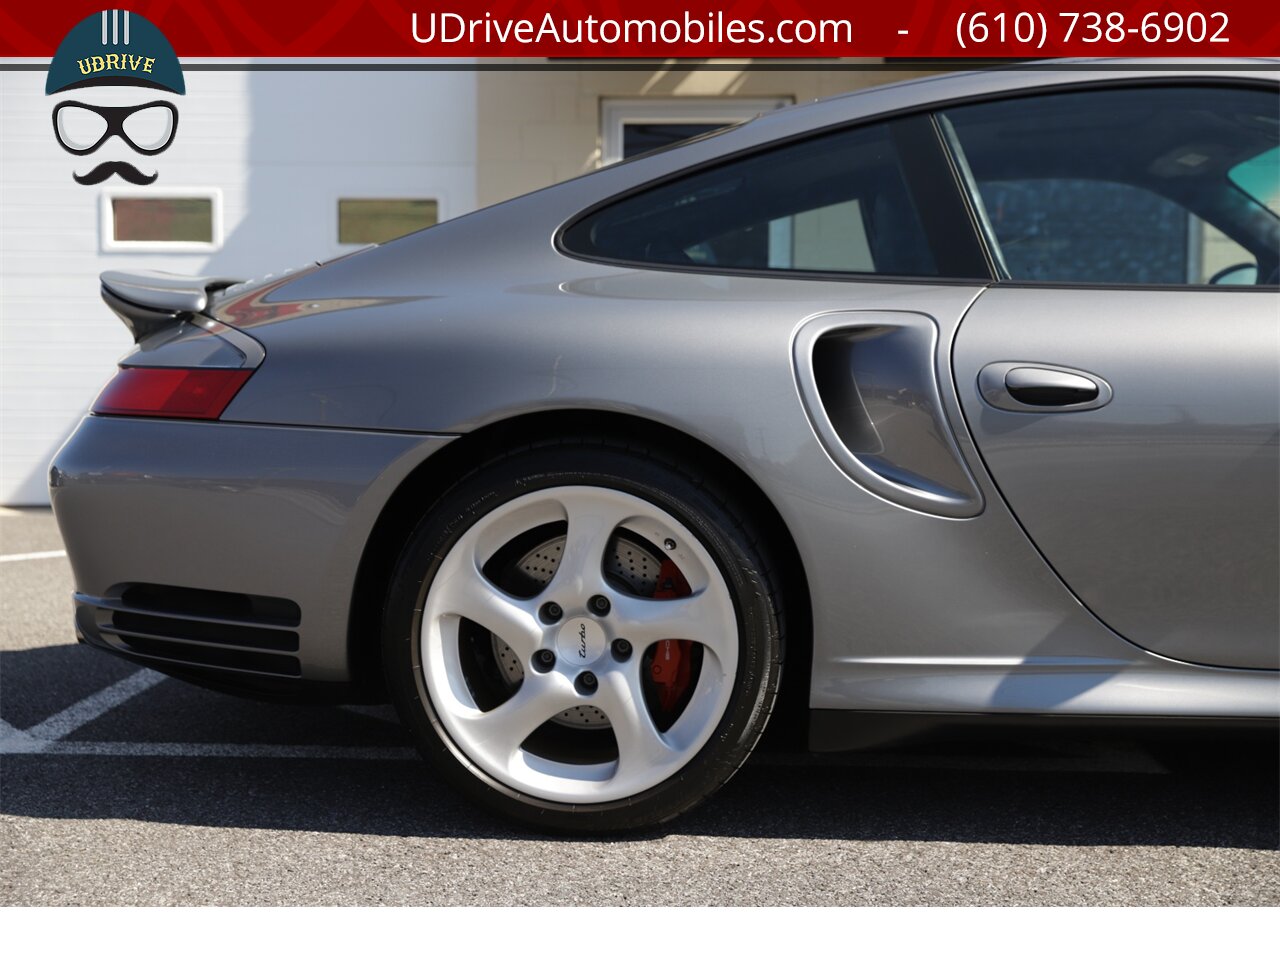 2003 Porsche 911 996 Turbo X50 Power Kit 6 Speed Seal Grey  over Black Leather - Photo 18 - West Chester, PA 19382